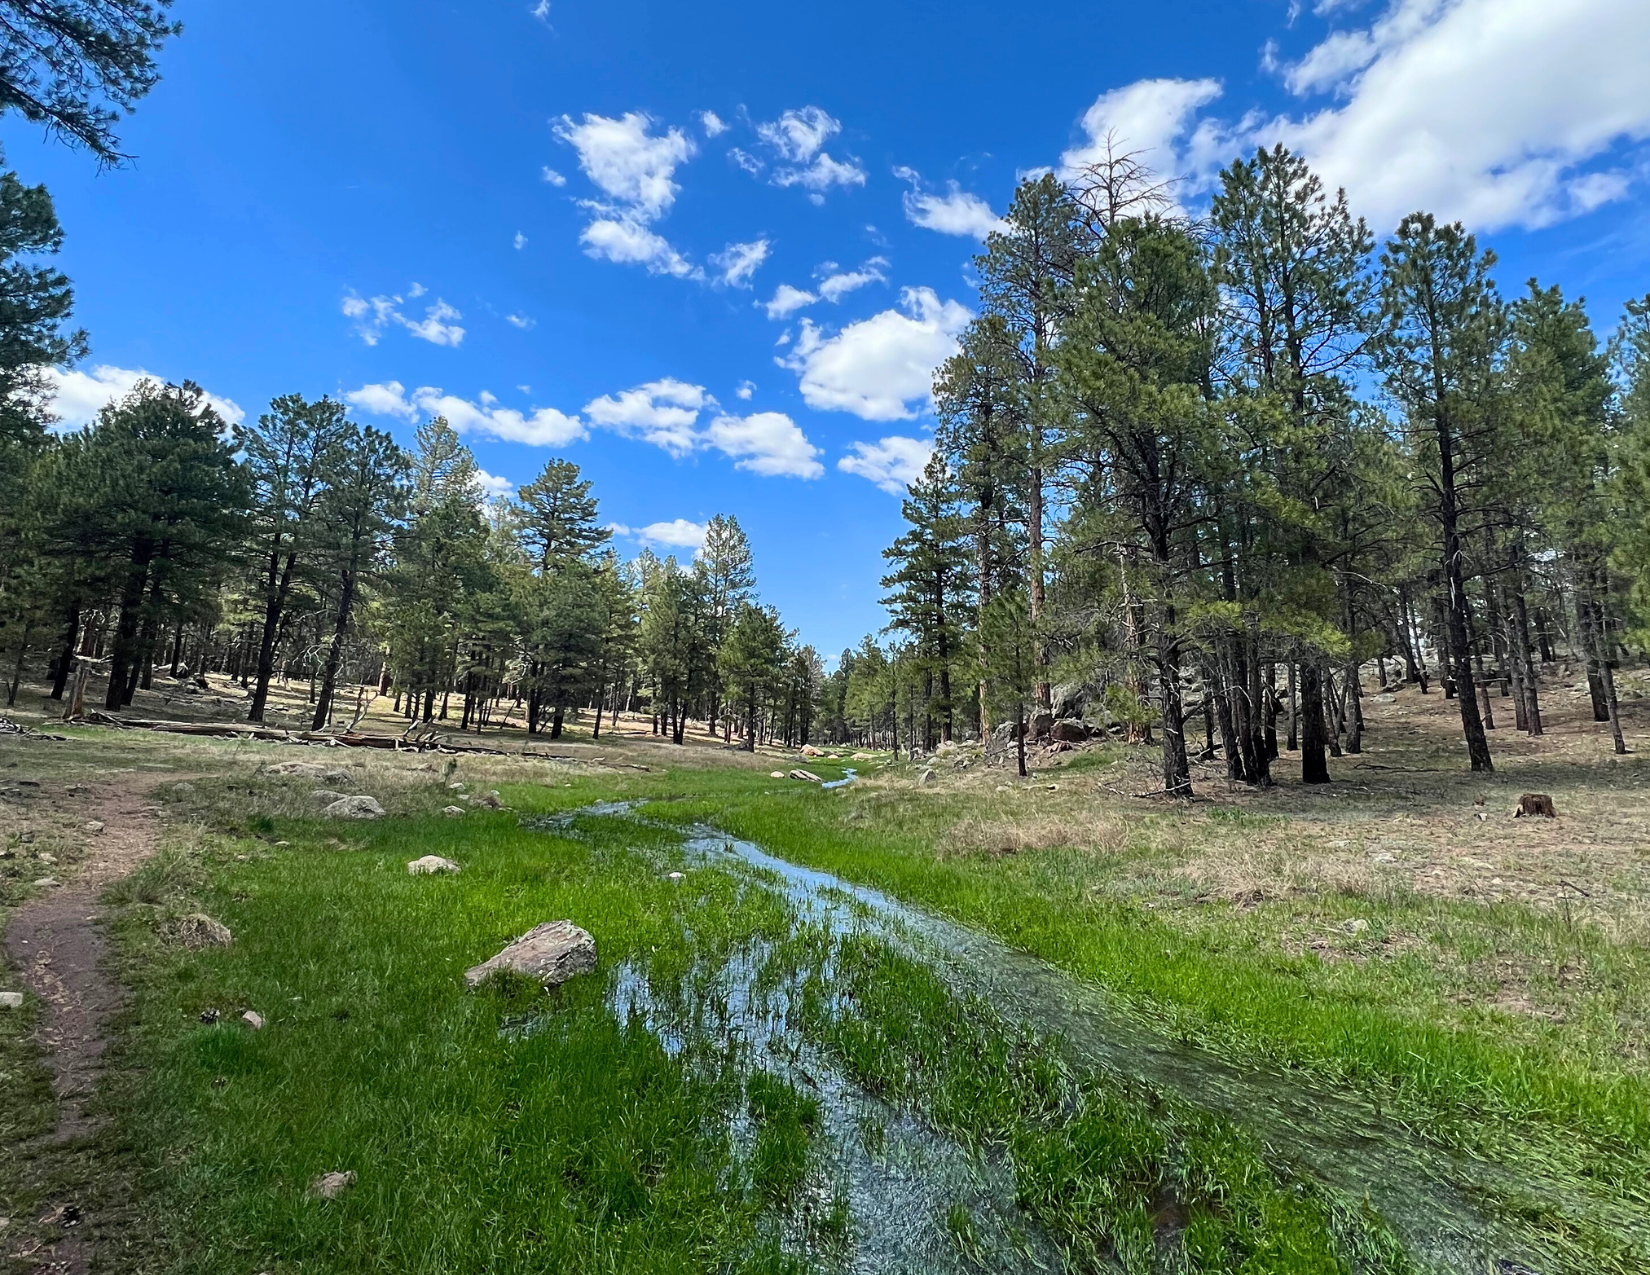 Quiet hiking trail near Flagstaff, Arizona full of luscious green grass and tall ponderosa pines, along with a little creek through the middle of the forest